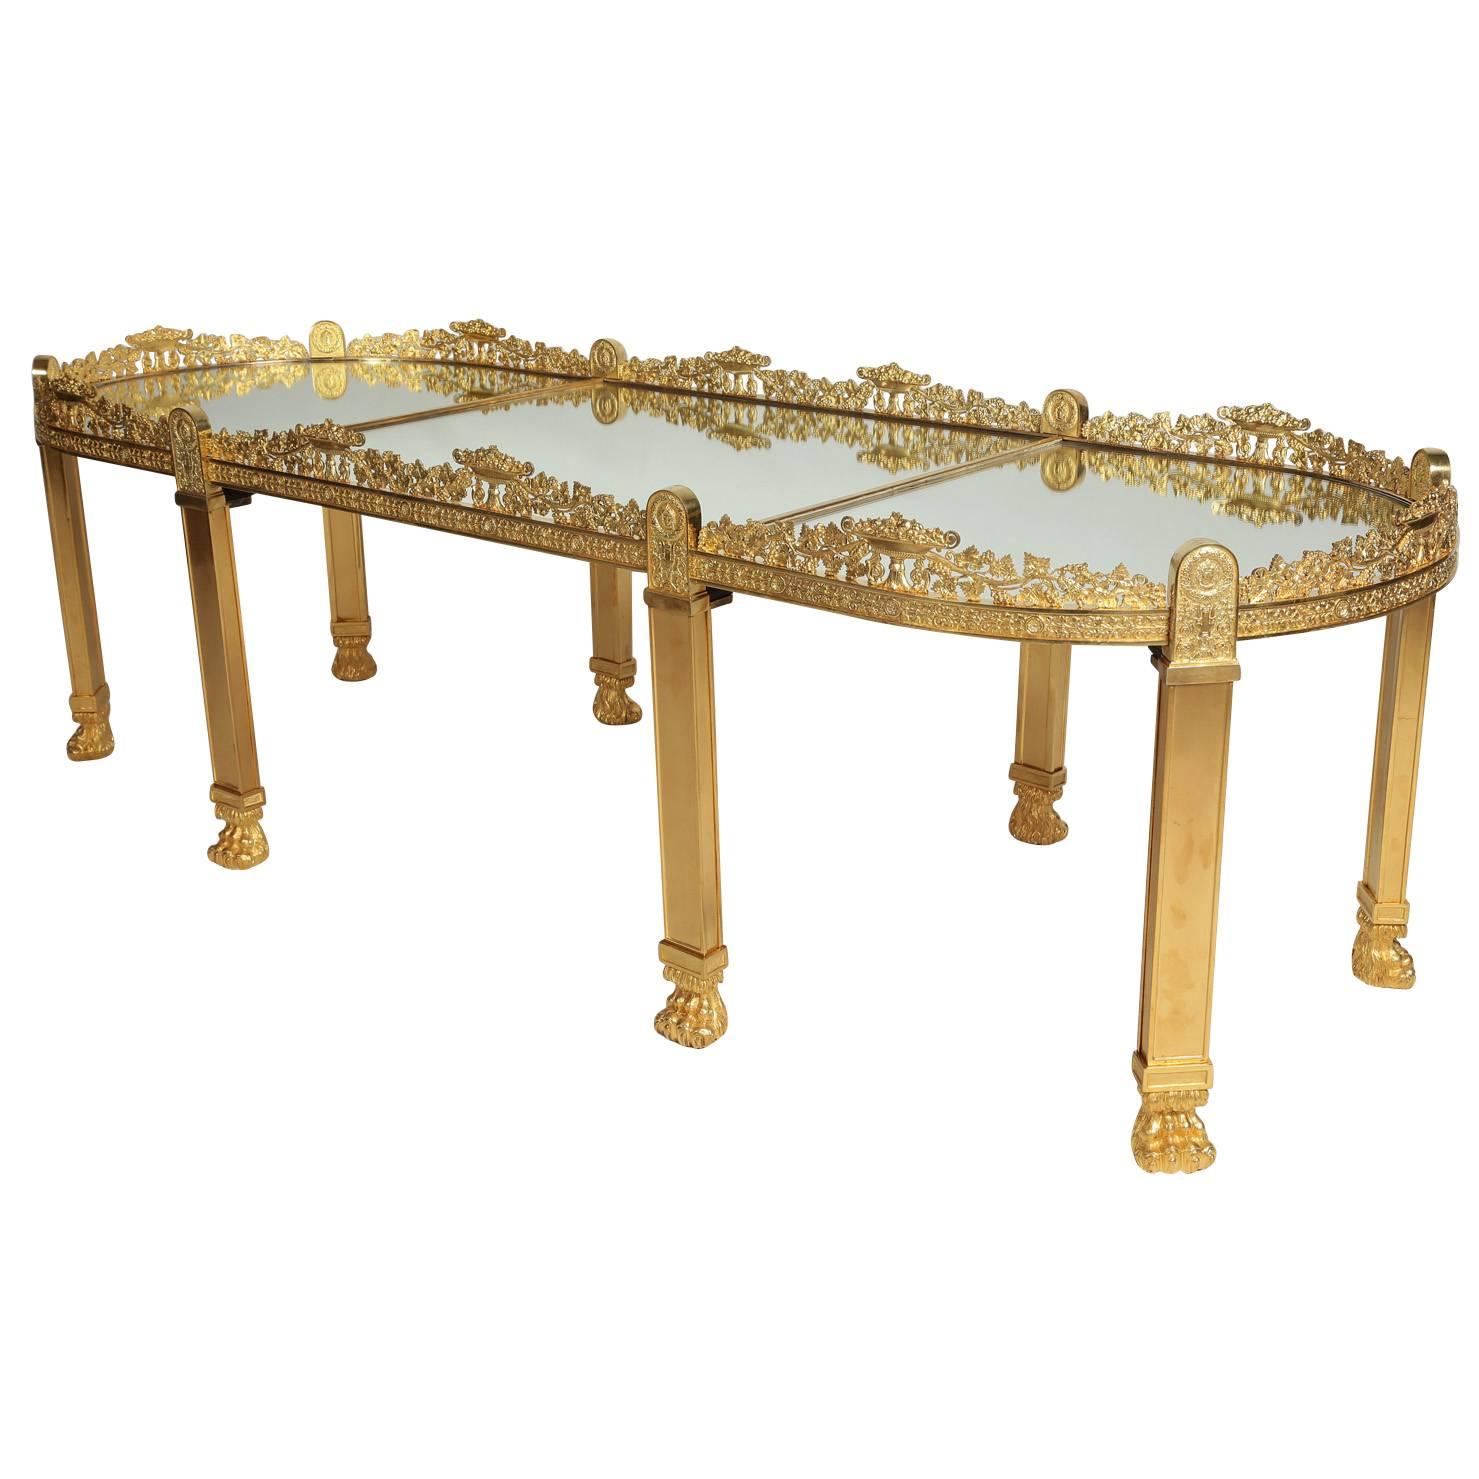 Large French Empire Style Napoleon III Gilt-Bronze Surtout-de-table Coffee Table